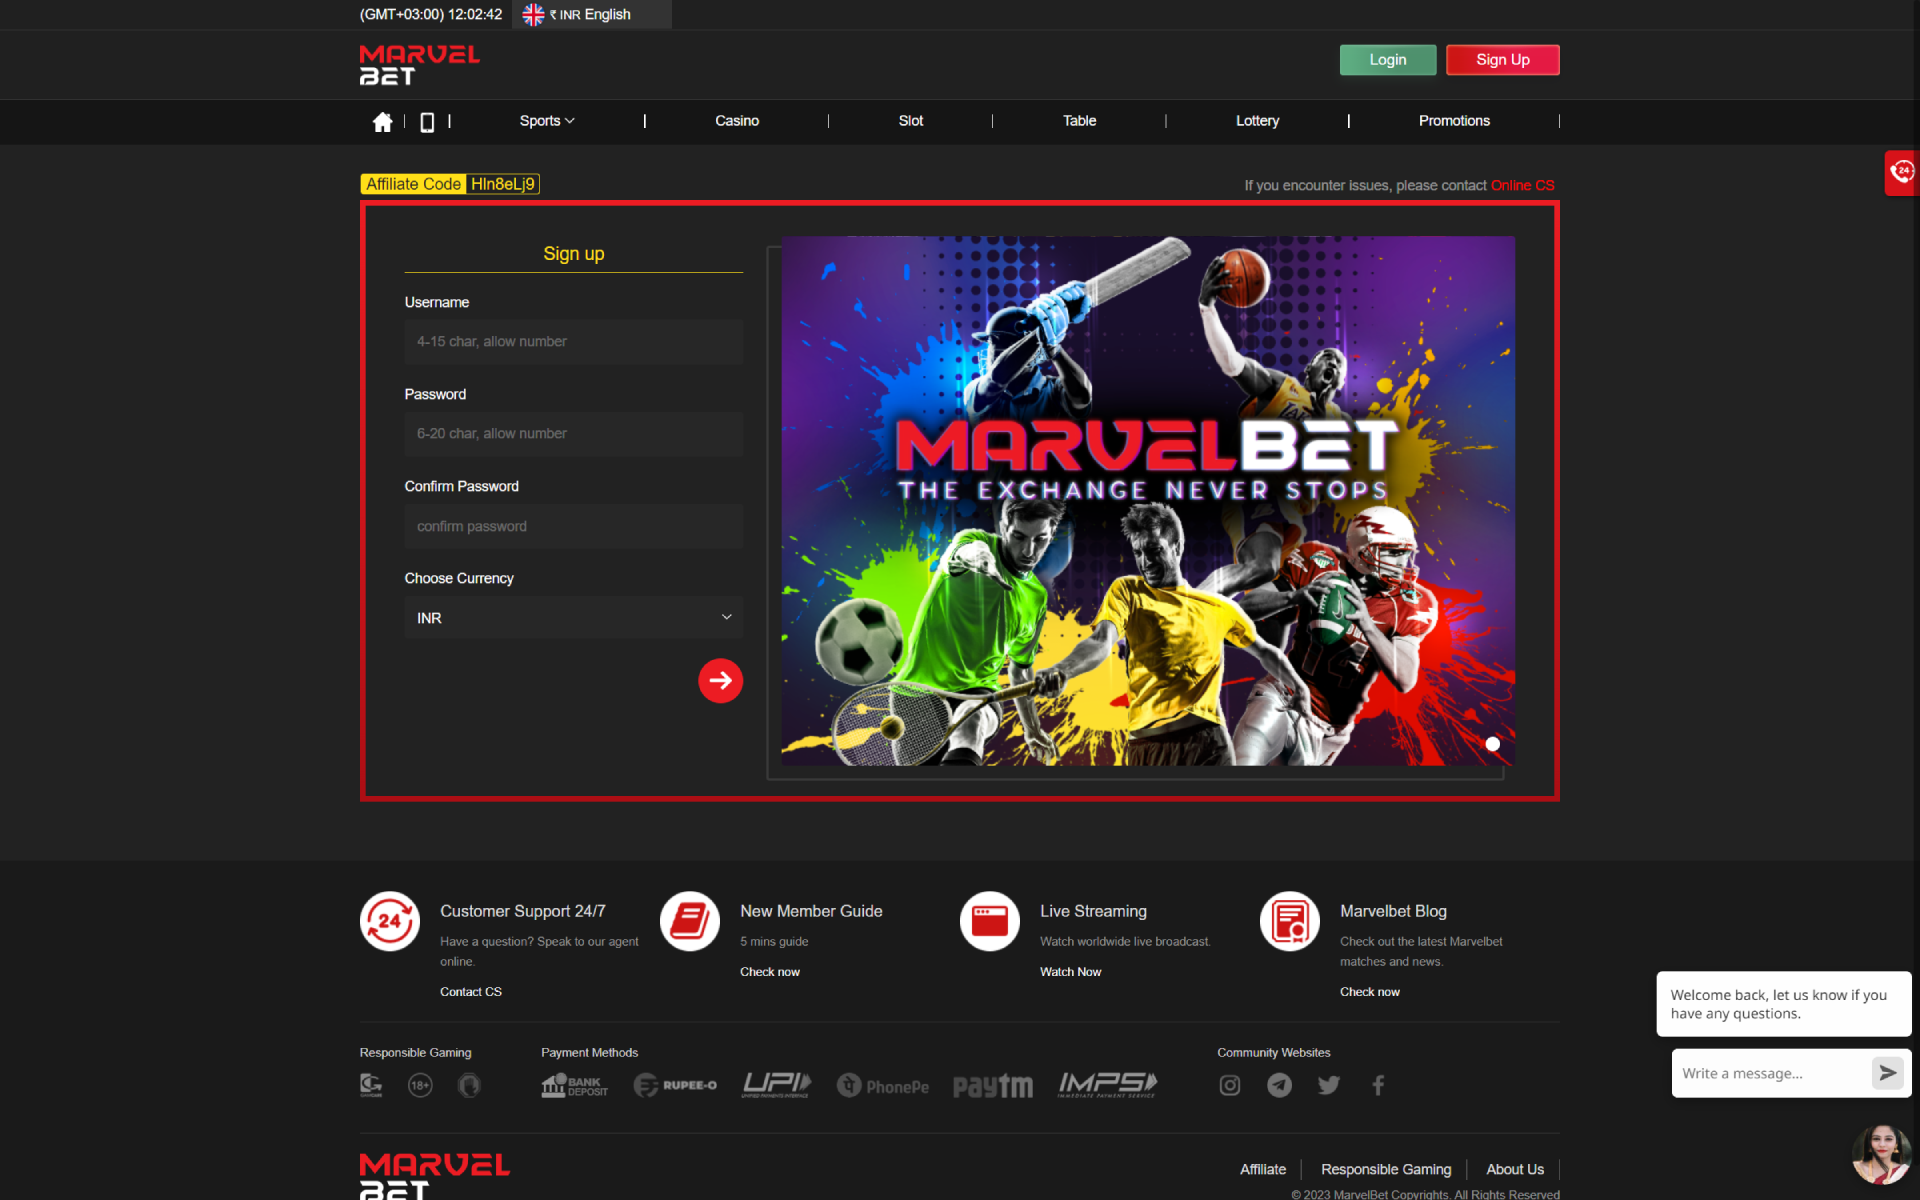 Open the Marvelbet signup form.